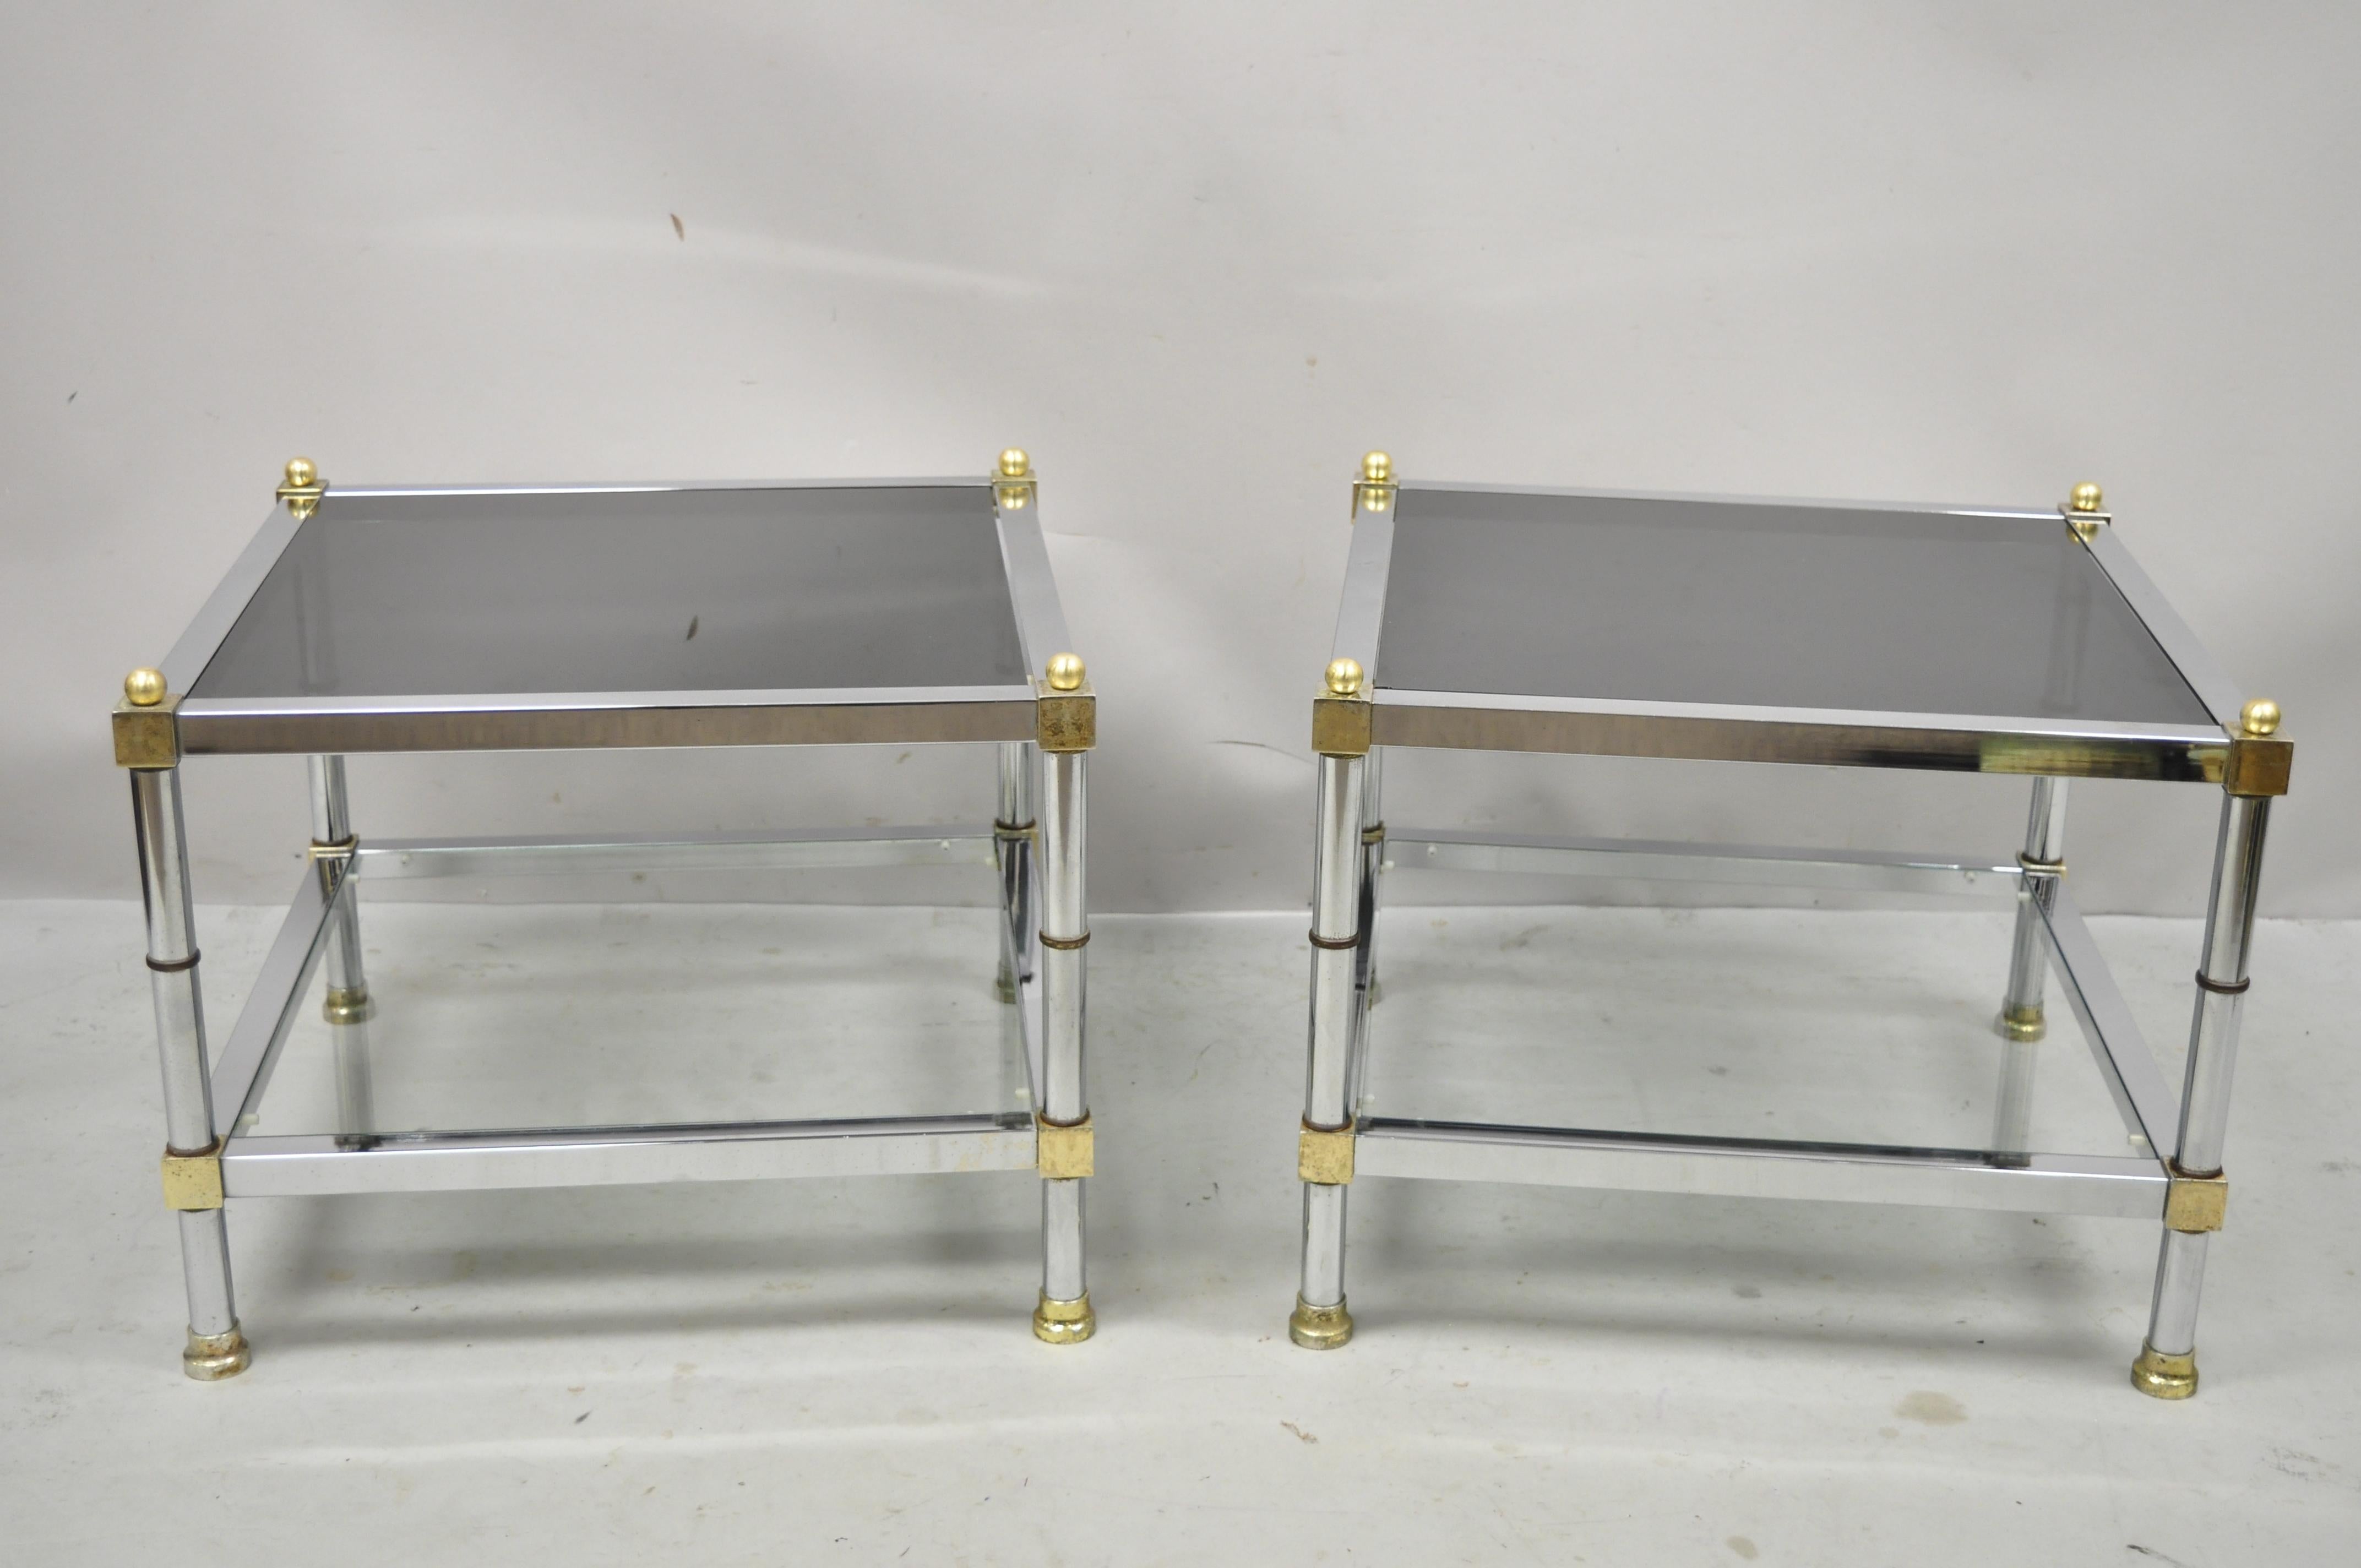 Vintage chrome and brass Maison Jansen style Hollywood Regency square glass top end tables - a Pair. Item features smoked glass top, clear glass lower tier, square chrome frame, brass accents, great style and form. Circa 1970s. Measurements: 16.5